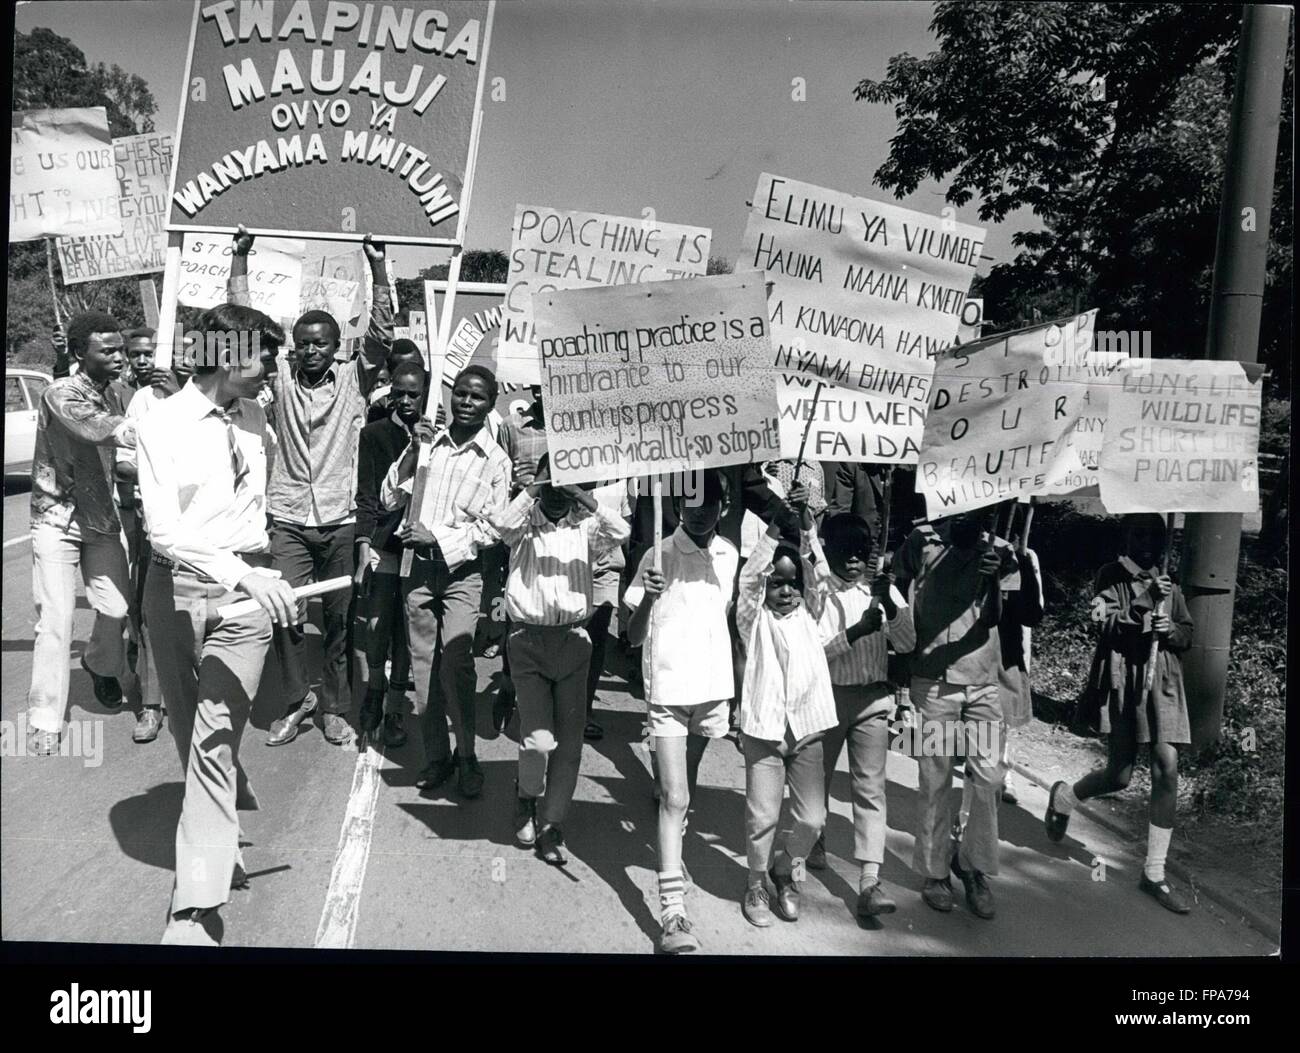 1981 - Kenyan children protest against poaching: Several hundred Kenyan children from all over the country demonstrated at the weekend in support of Government measures to end poaching and to eliminate criminal middlemen in the illegal traffic in trophies, both of which are currently posing a threat to Kenya's wildlife. They were all members of the Kenyan Wildlife Clubs, and they congregated outside the Nairobi Museum where they were addressed by their National Chairman, Mr Richard Leakey. Mr Leakey, son of them late Louis S.B. Leakey, is also Director of the National Museums of Kenya. Later, Stock Photo